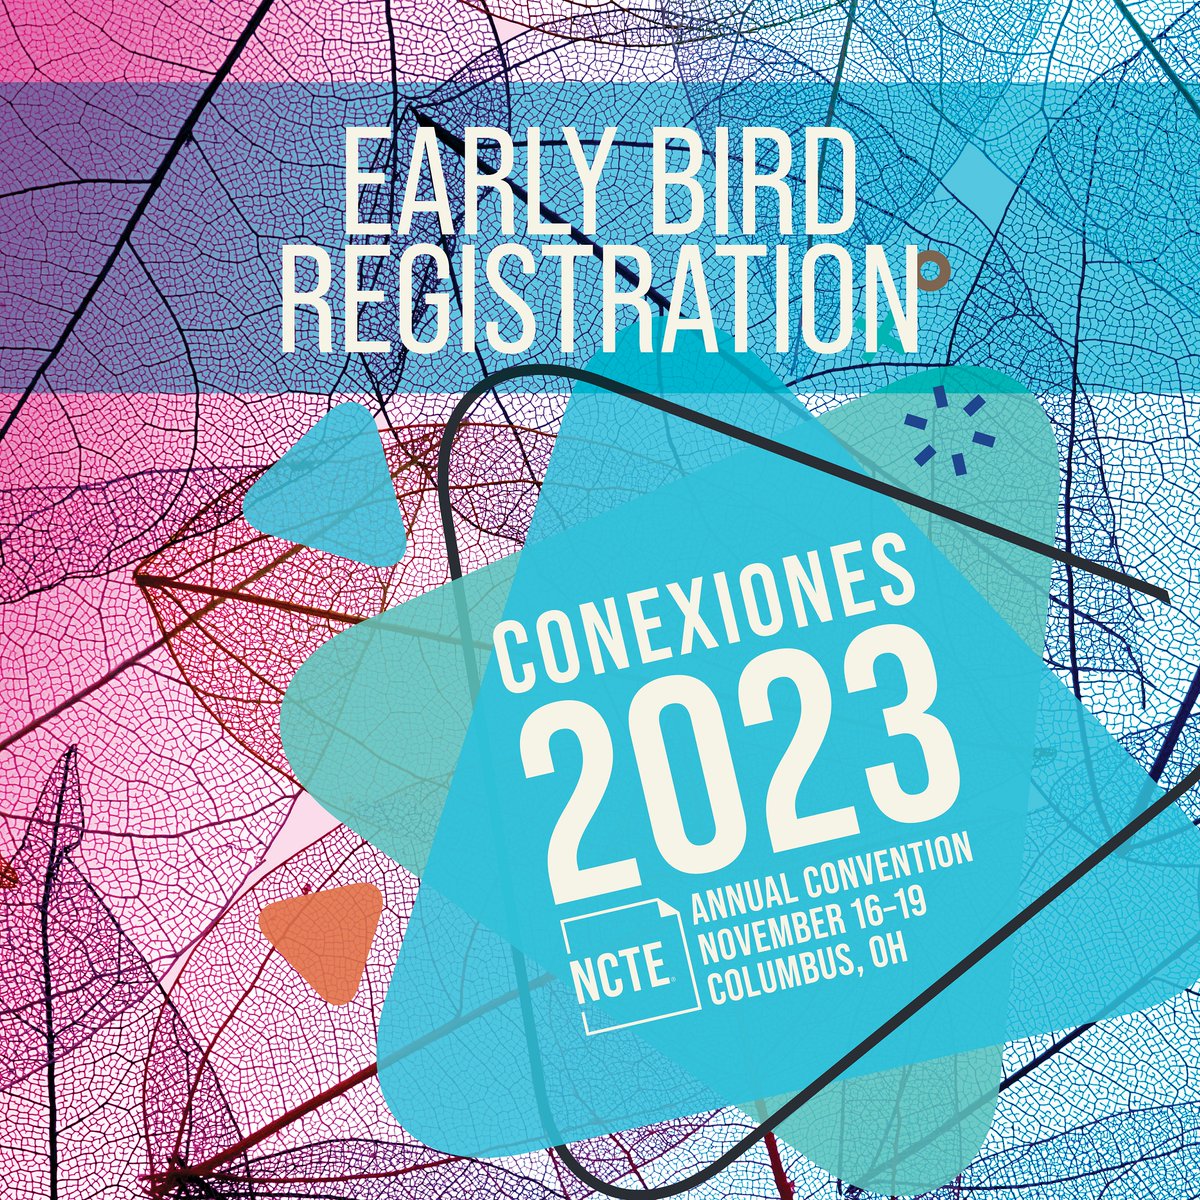 It’s officially fall, which means one thing for NCTE: the countdown to this year’s Annual Convention is on! You have just 18 days to secure early-bird pricing for this year’s can’t-miss event for ELA & literacy educators. Learn more and register at convention.ncte.org/registration/.